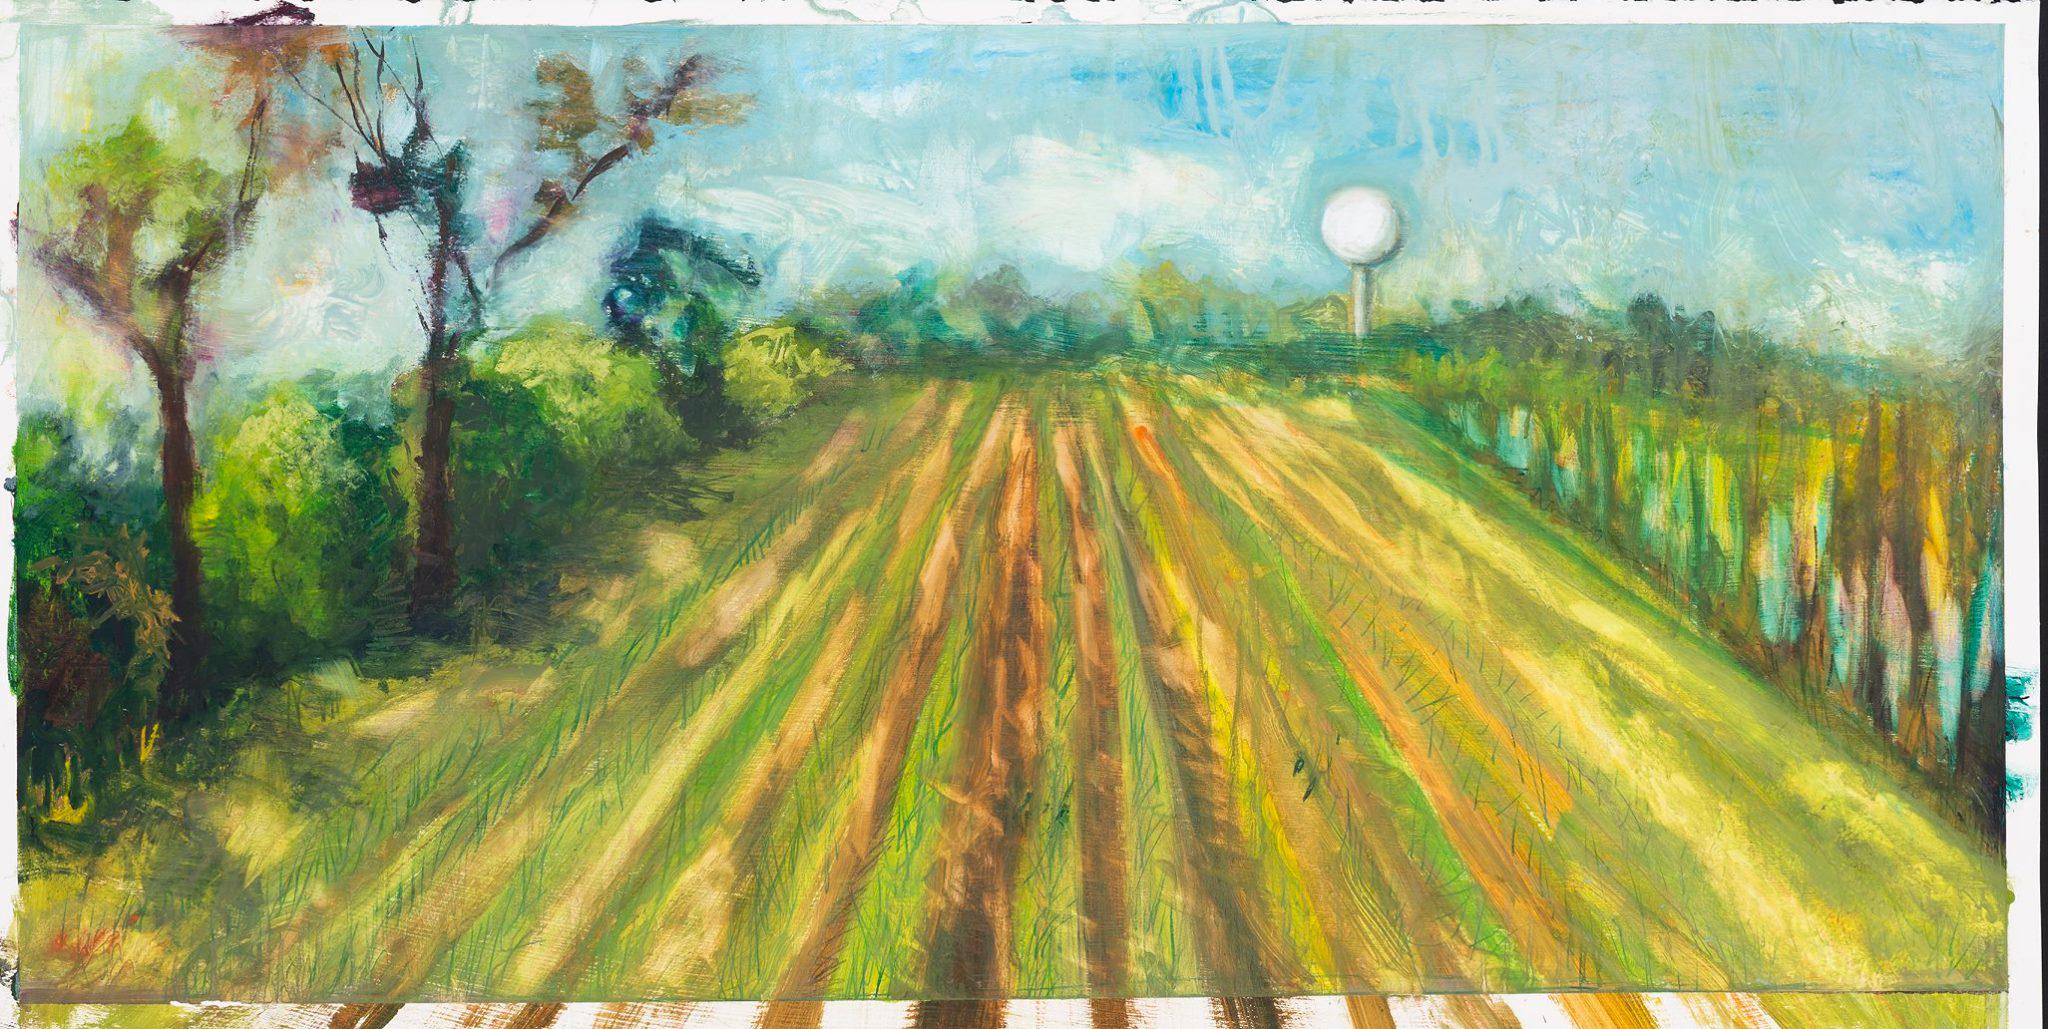 Thibodaux Sugarcane Field, a painting by Gina Phillips, from the show Crow Valley at Jonathan Ferrara Gallery, 2018.